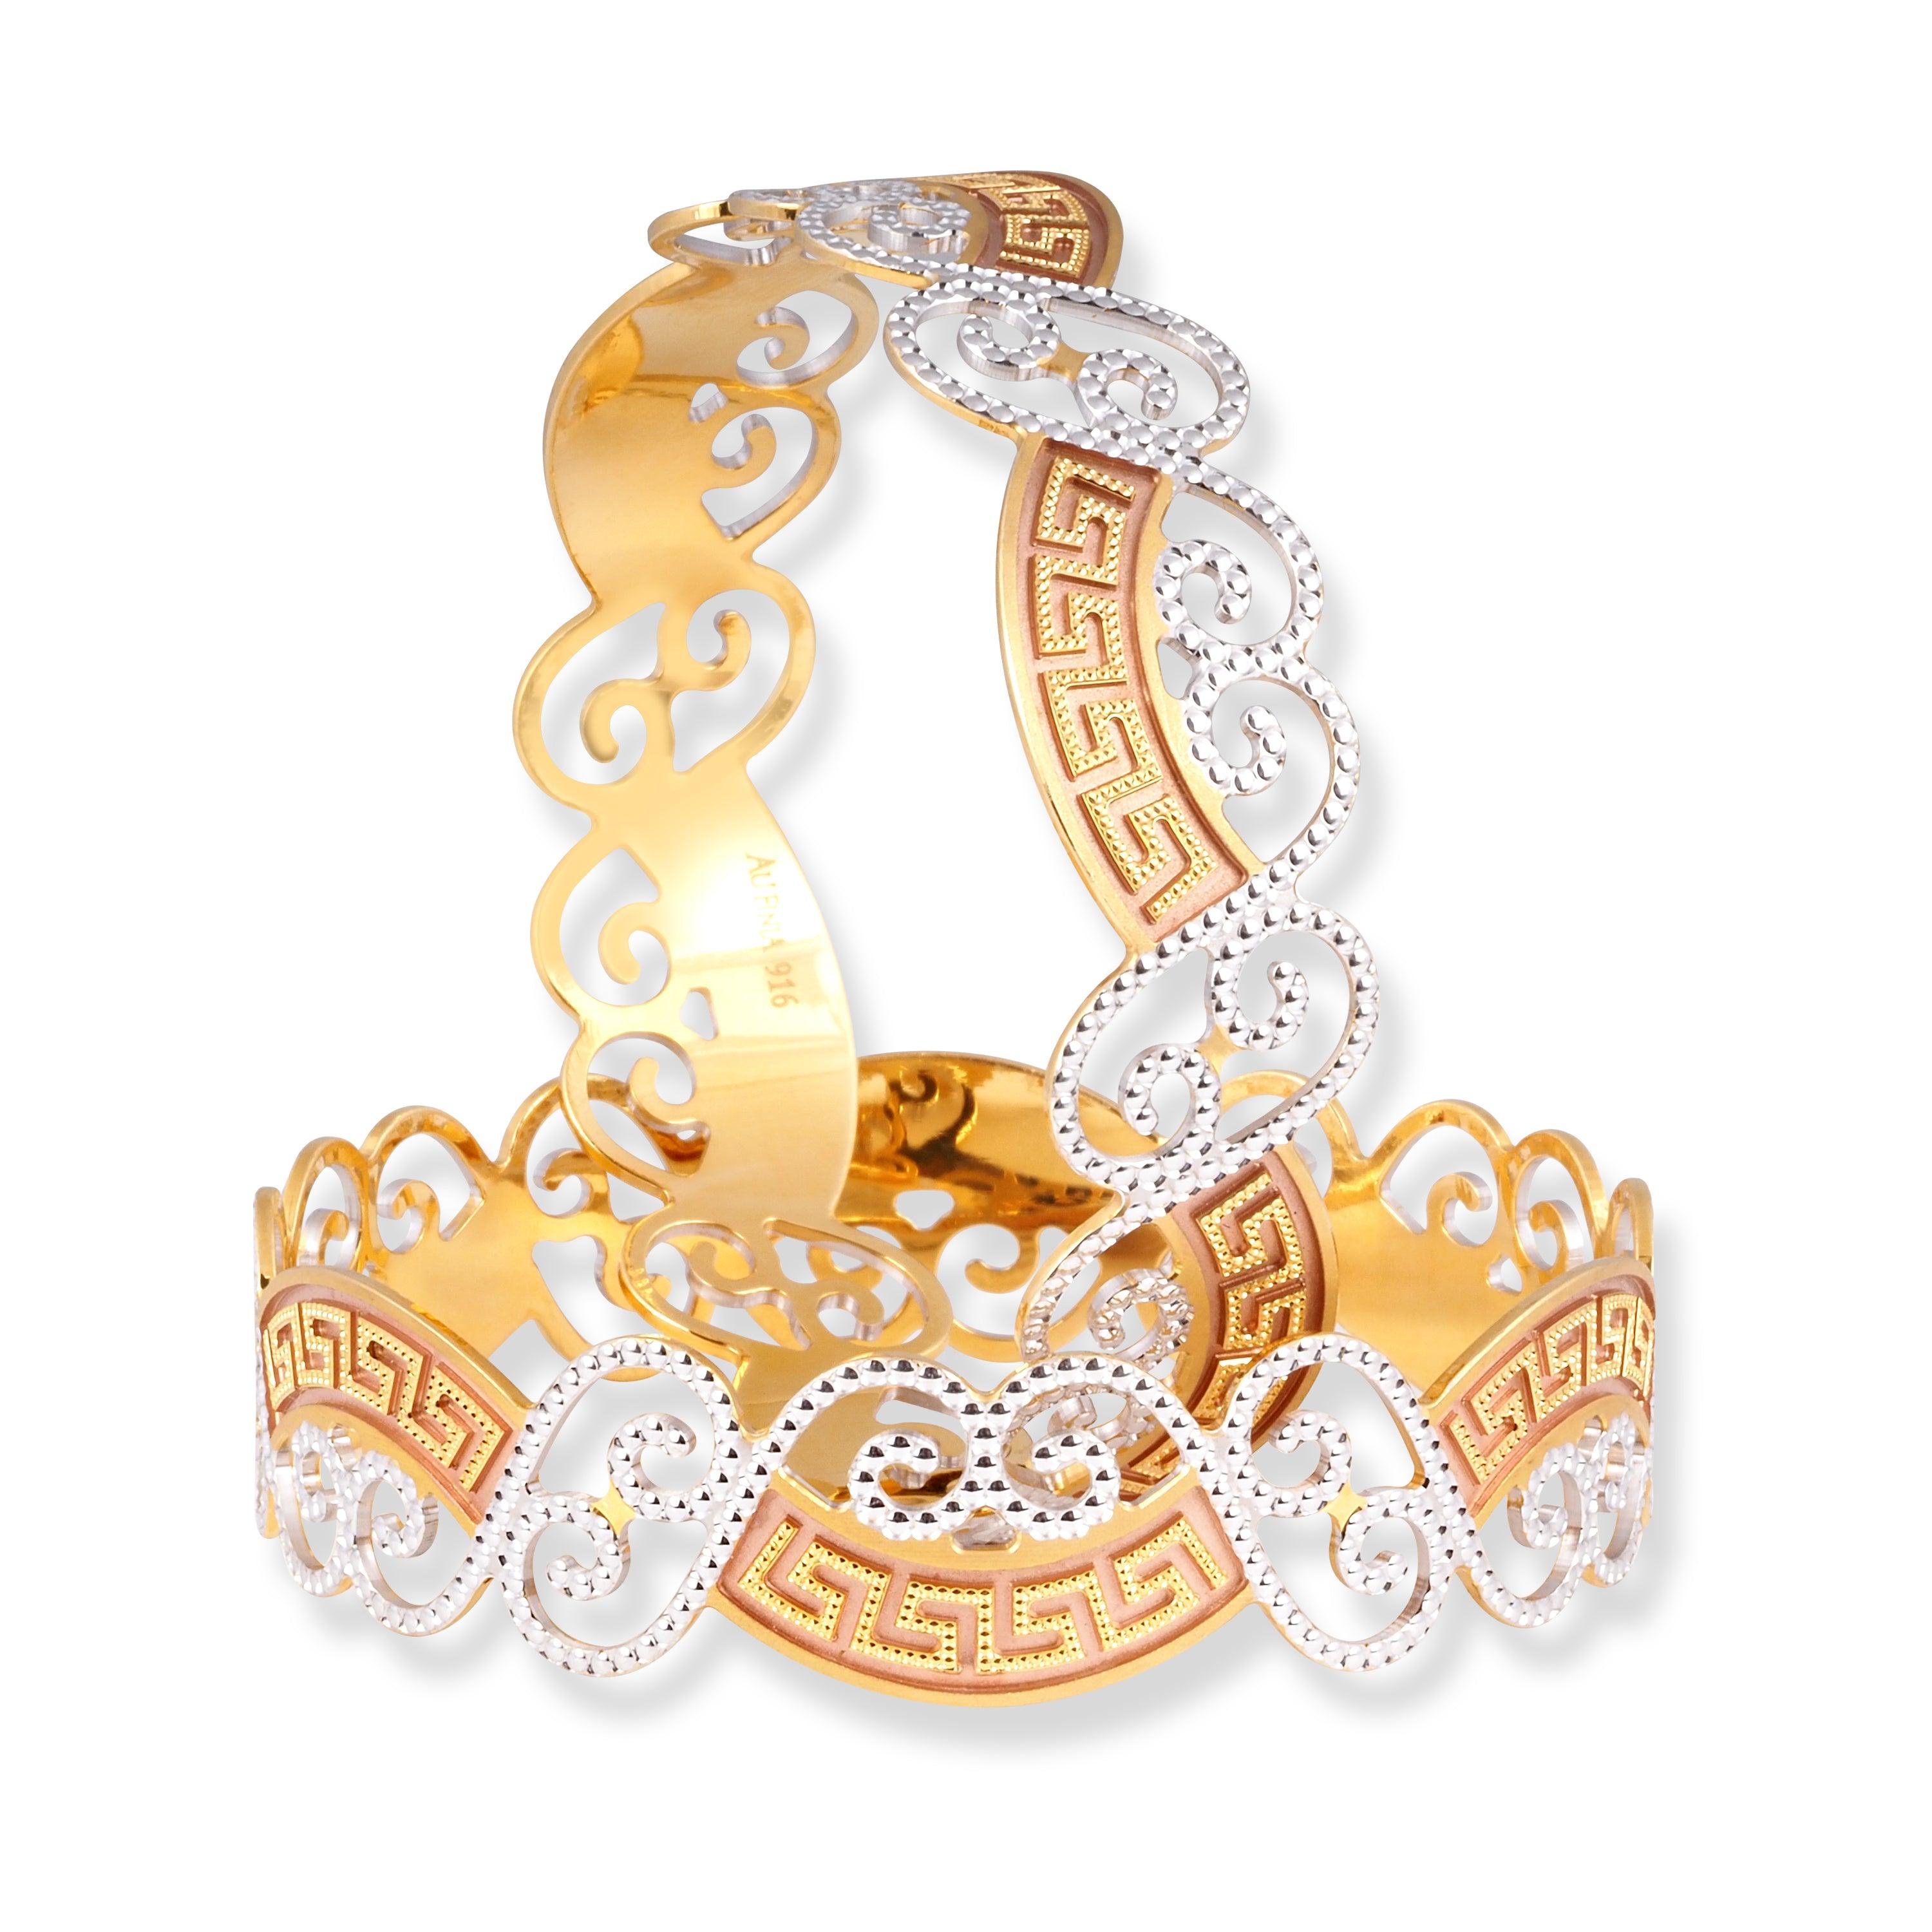 22ct Pair of Gold Bangles Rose Gold & White Gold Rhodium Plate Finish B-8558 - Minar Jewellers